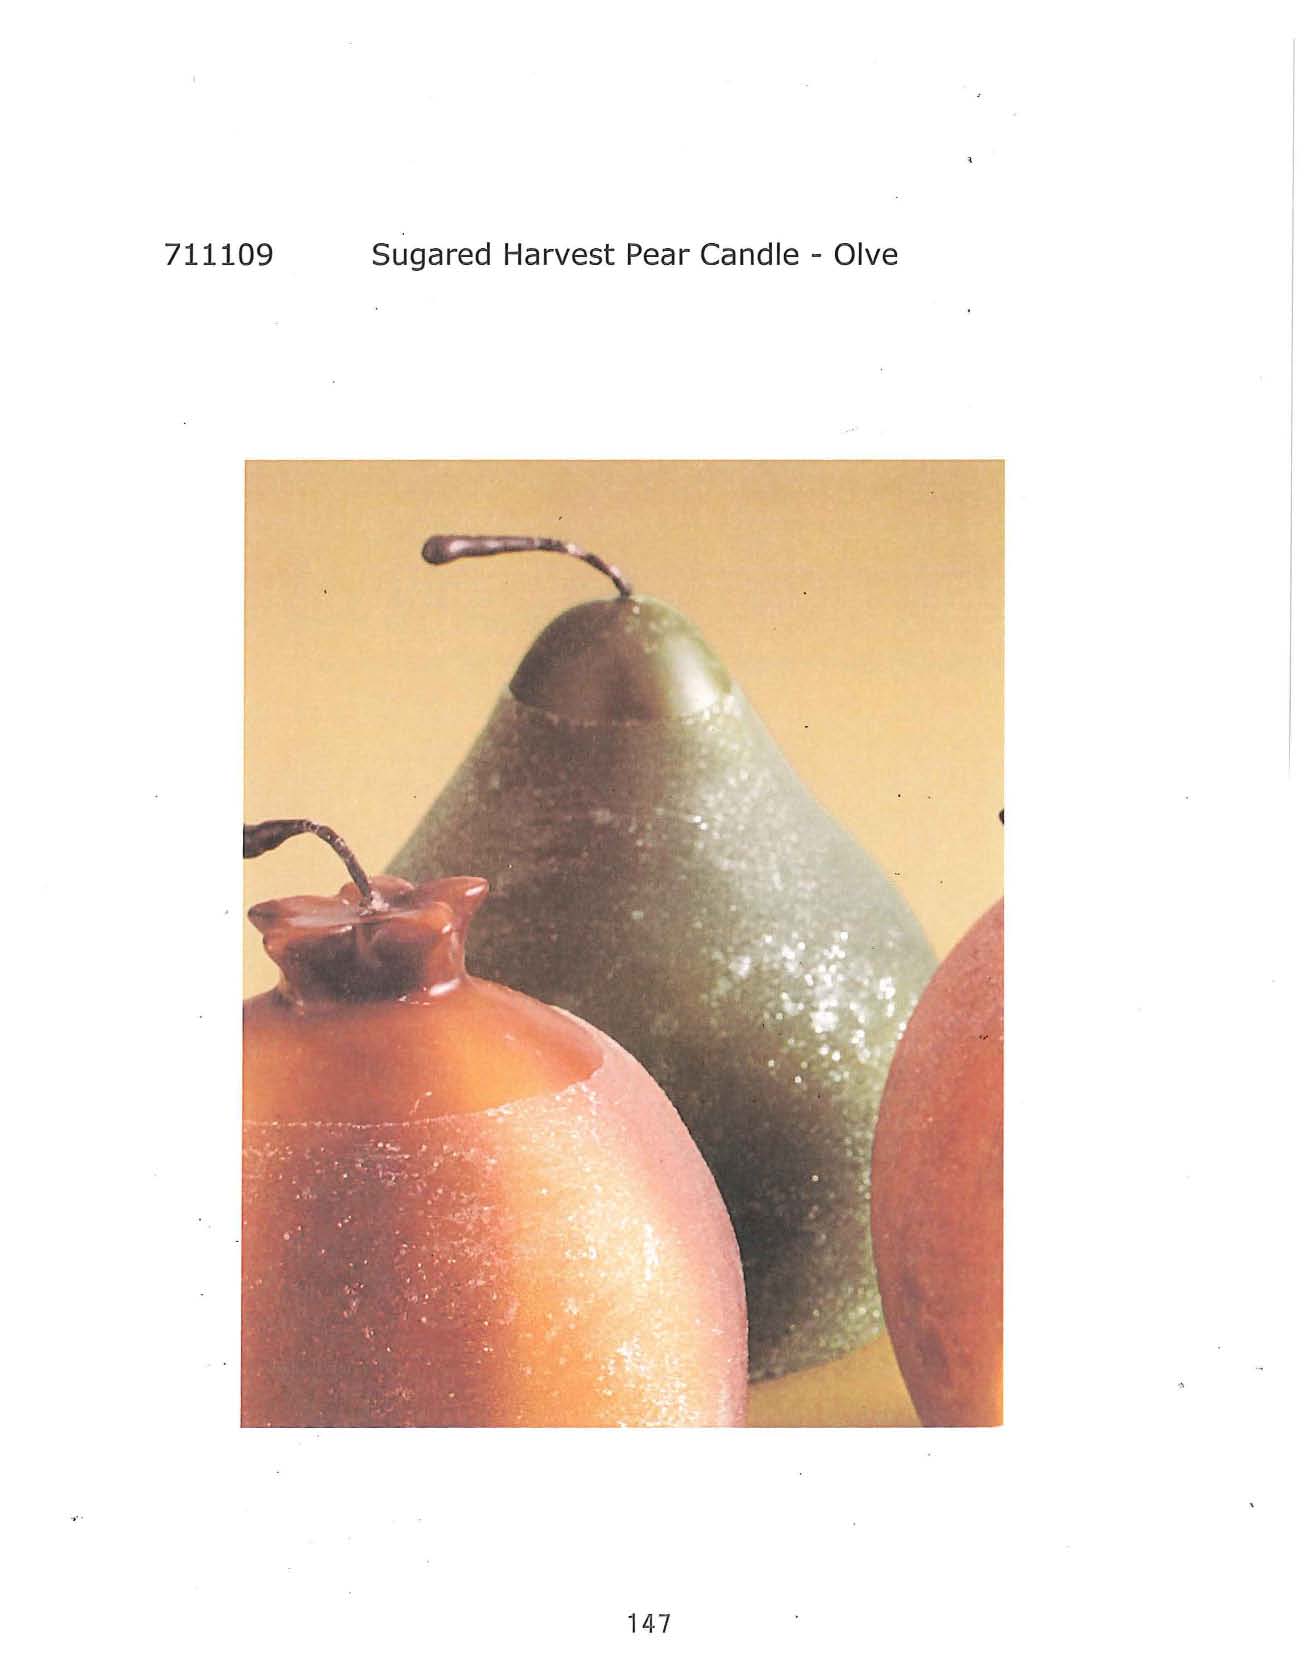 Sugared Harvest Pear Candle - Olive